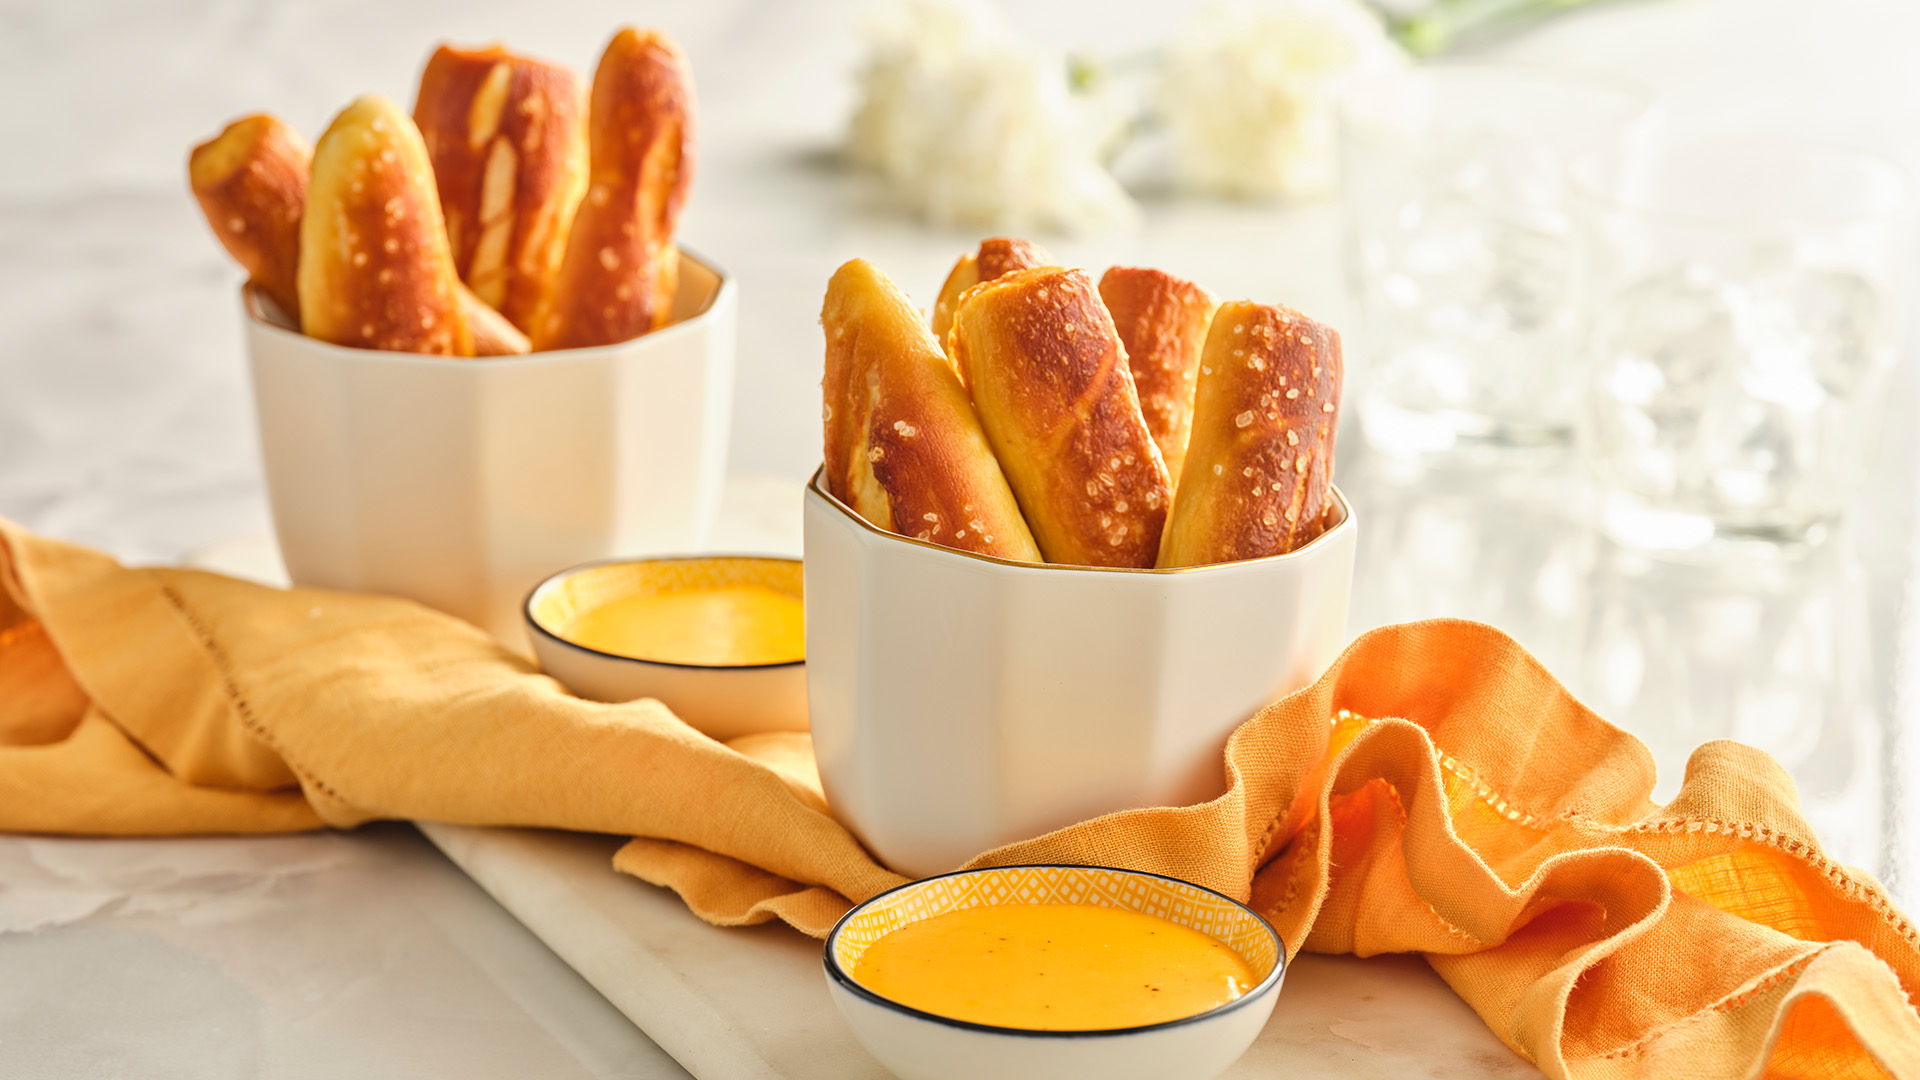 Two white bowls with homemade pretzel sticks next to two small white bowls containing cheese dip and an orange napkin.